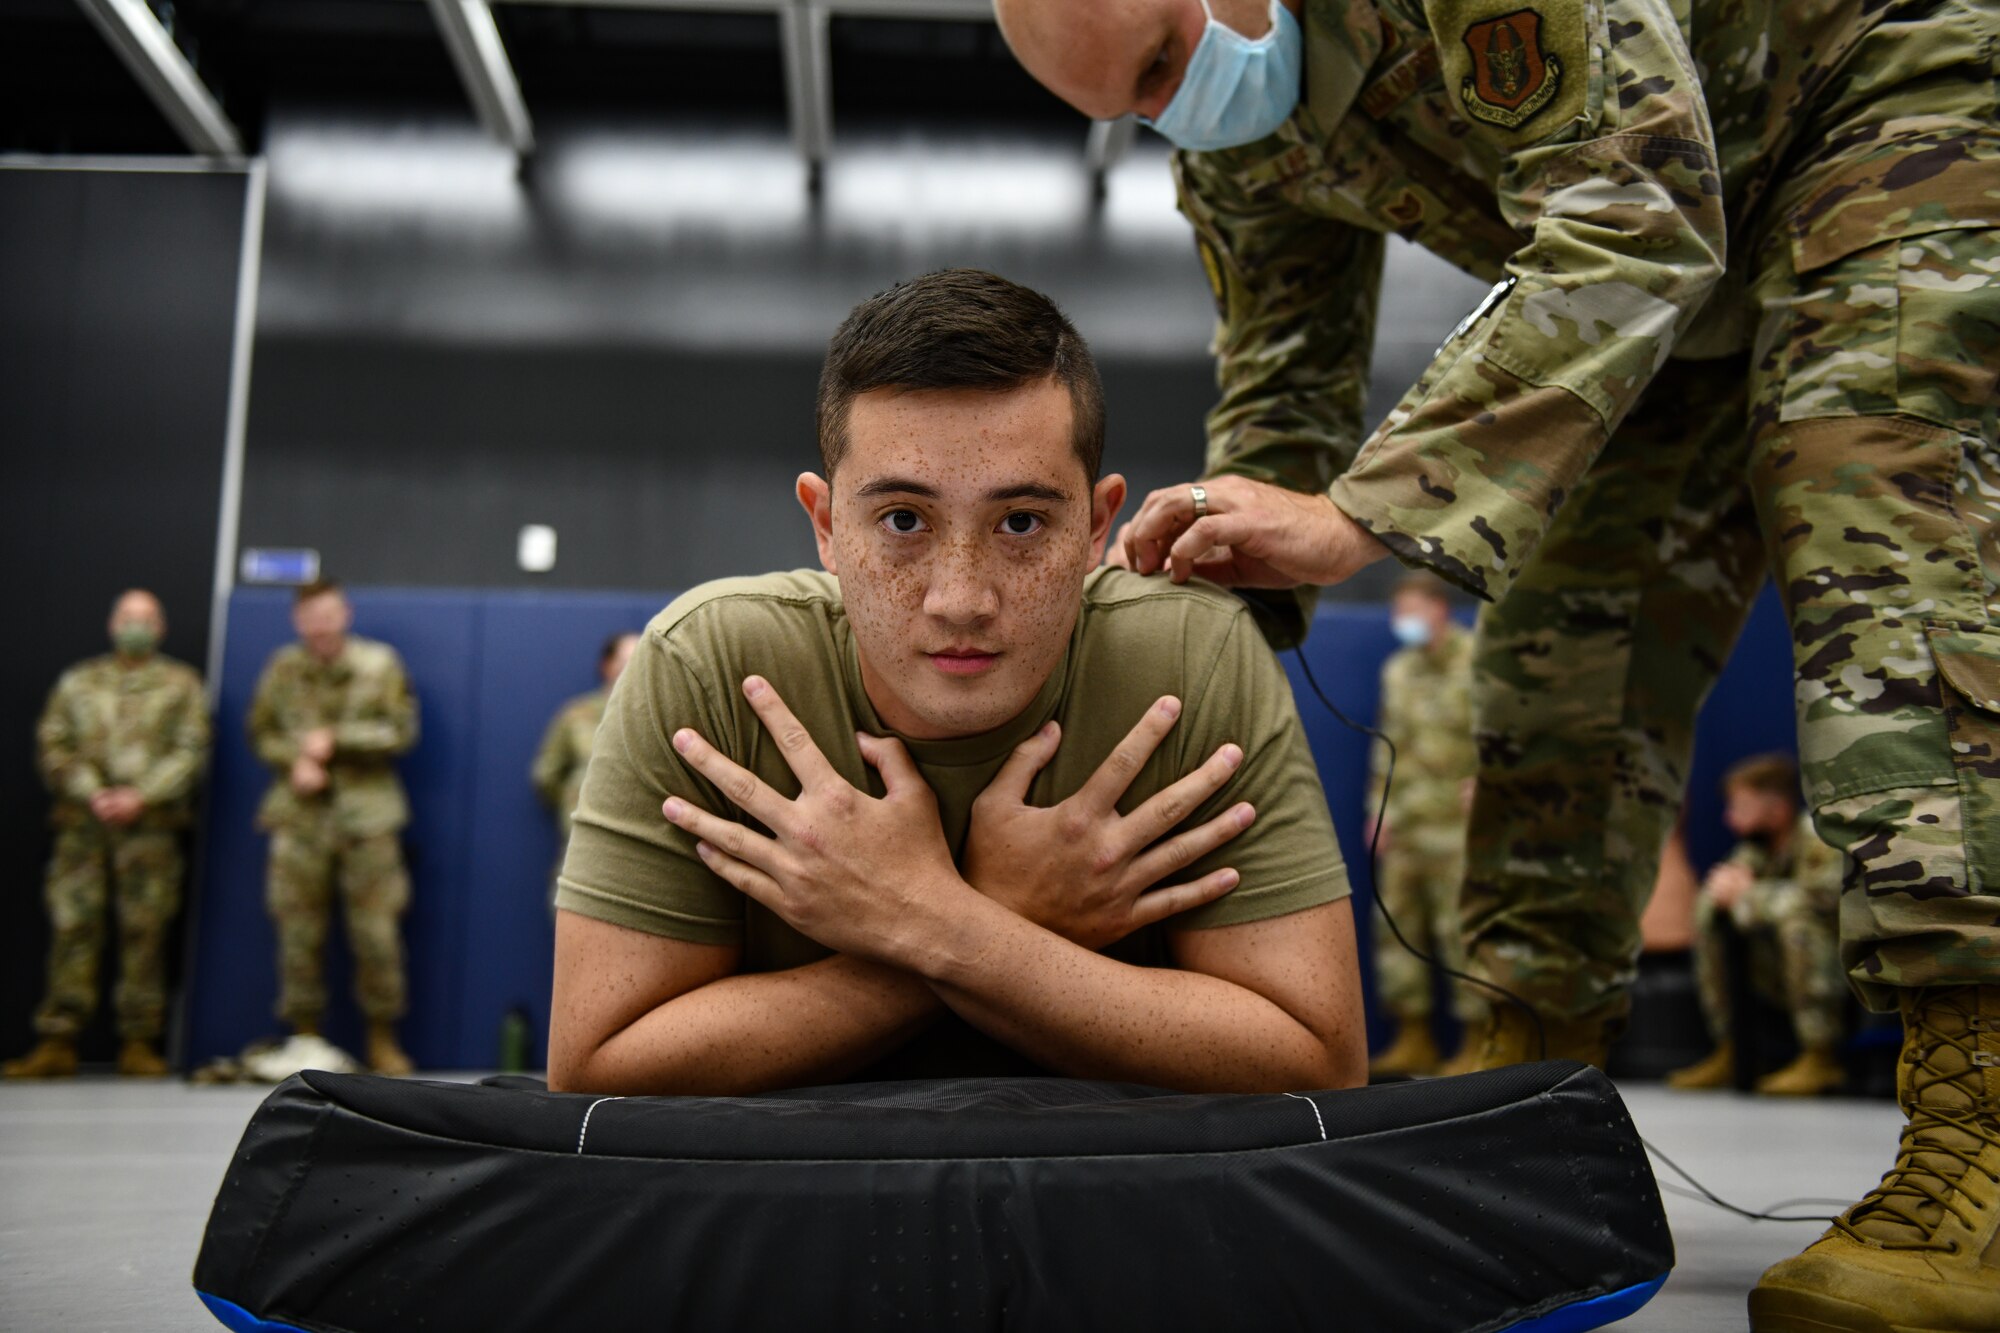 Security Forces Airmen must complete Taser training, which includes enduring a Taser shock, before they are qualified to carry one on duty.